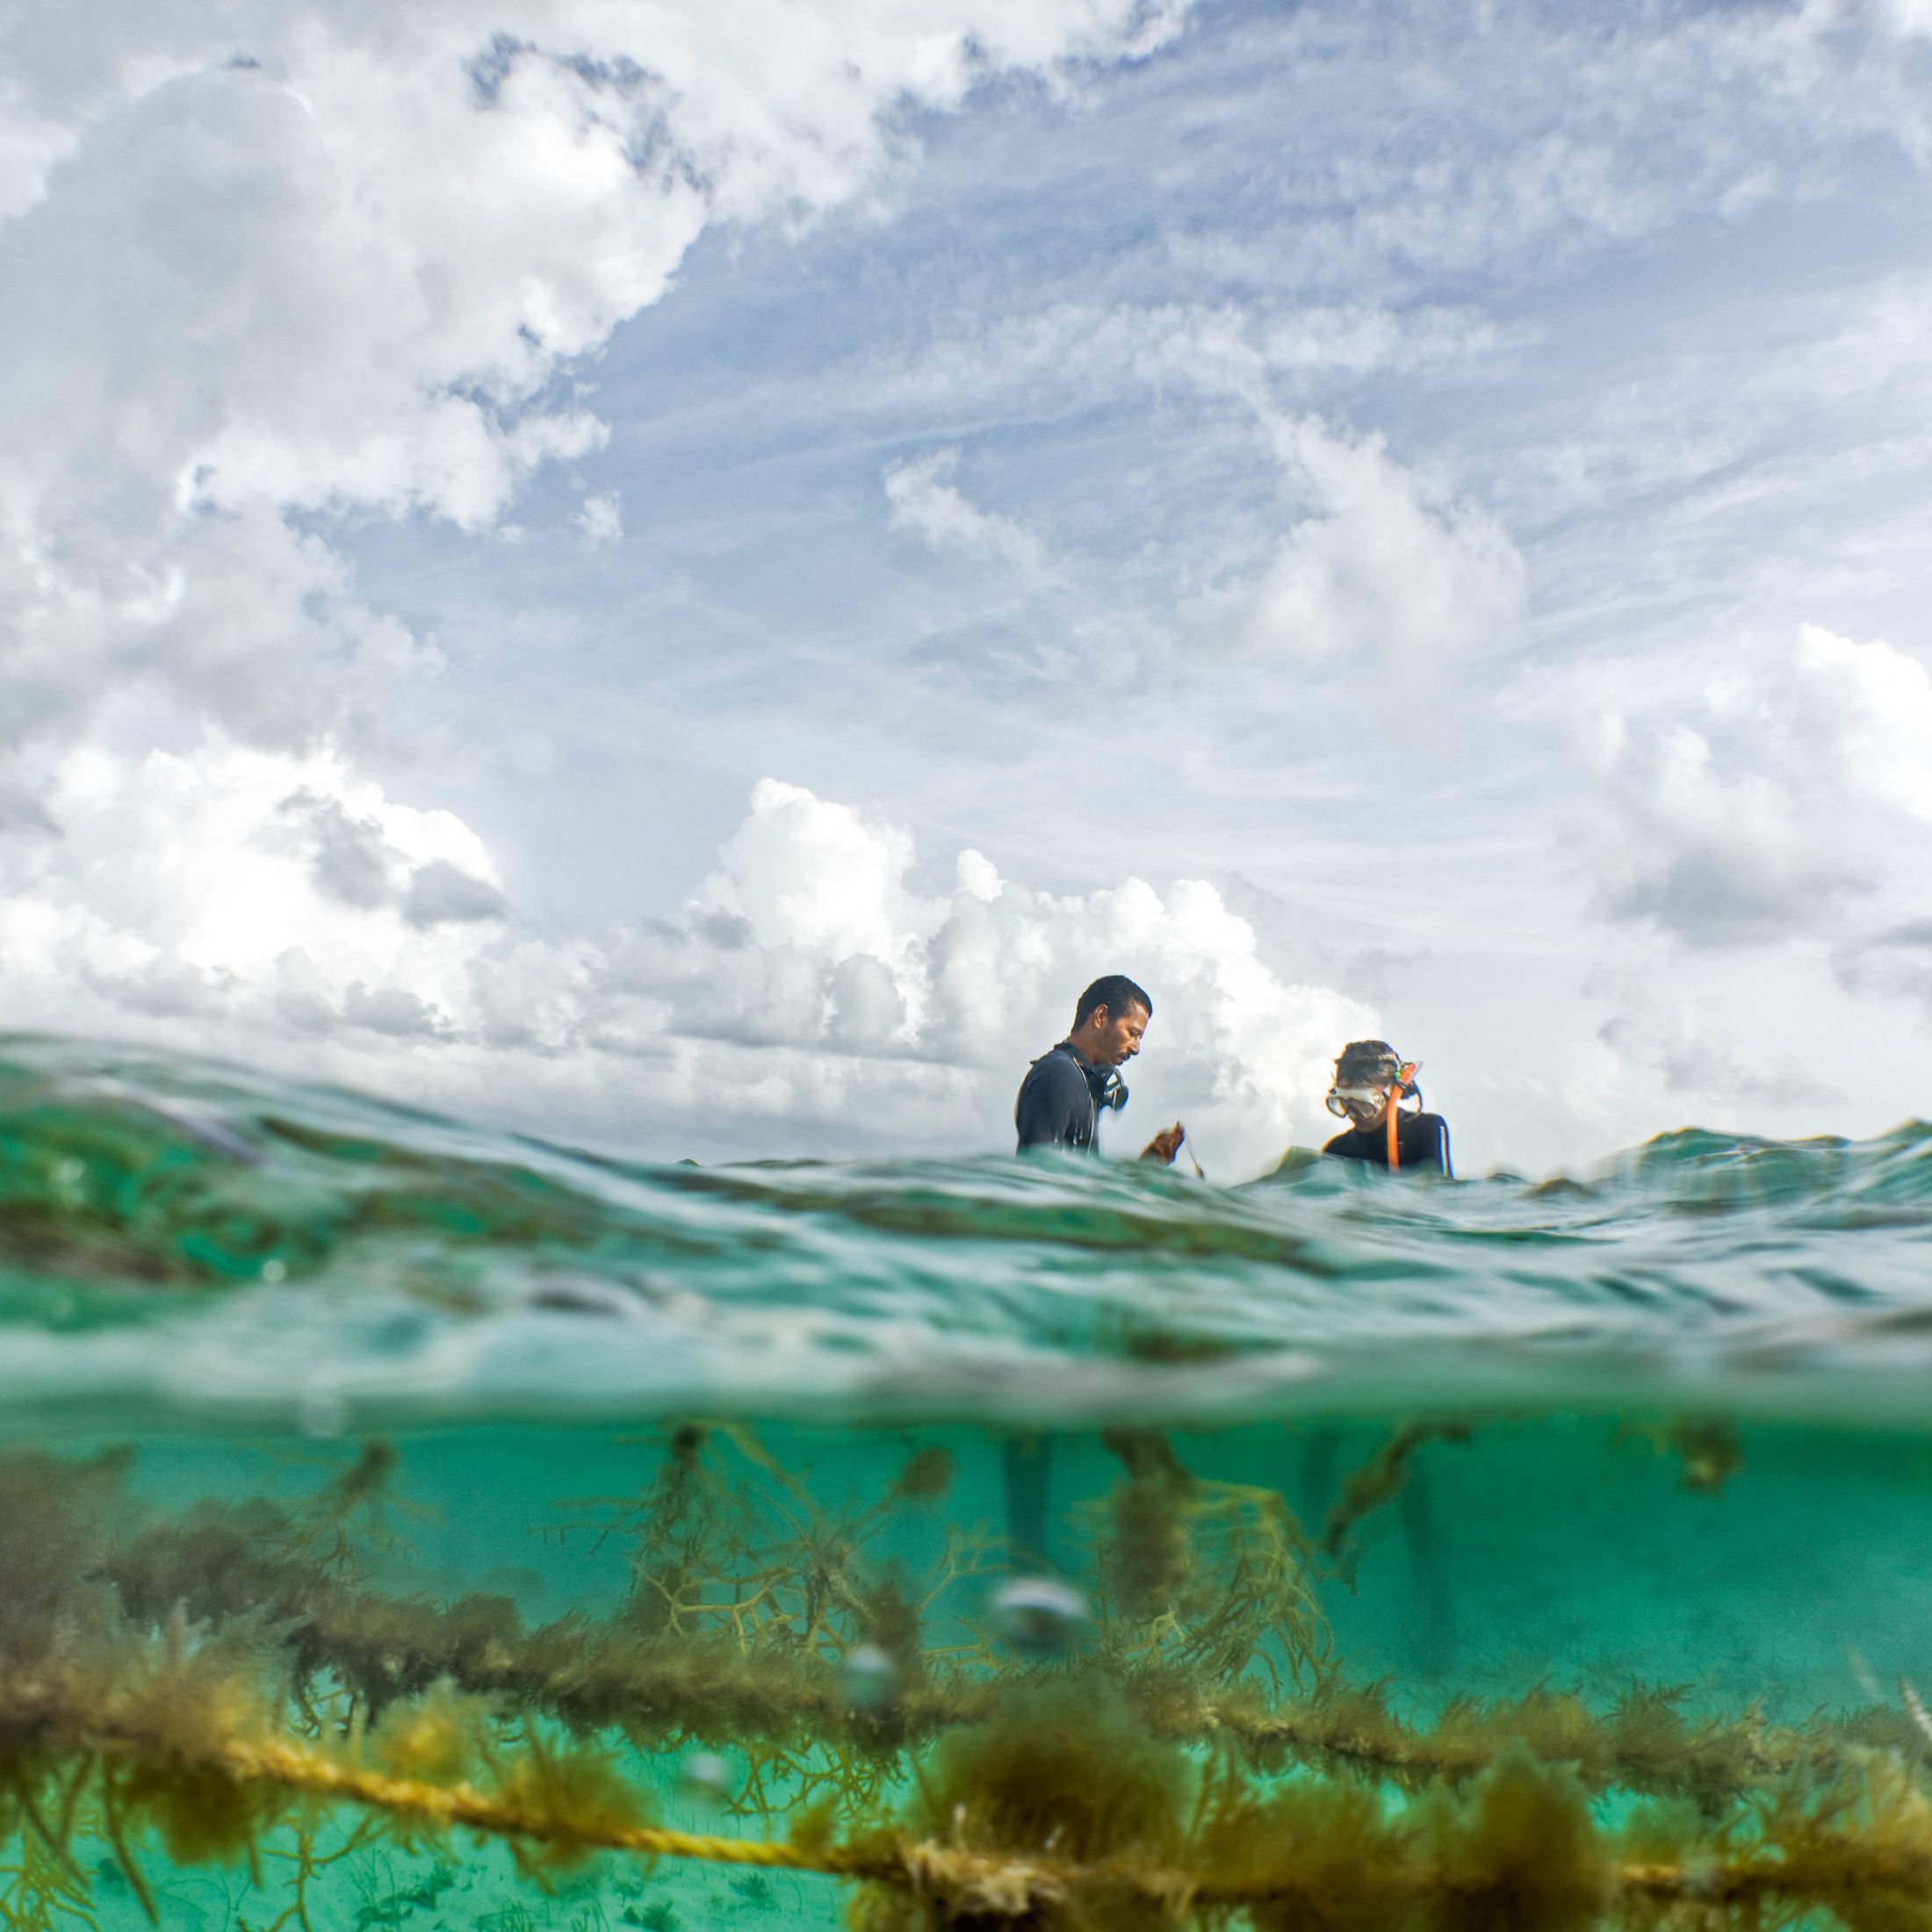 In this view from under and above water, two people in wet suits harvest seaweed from the waters of Belize.